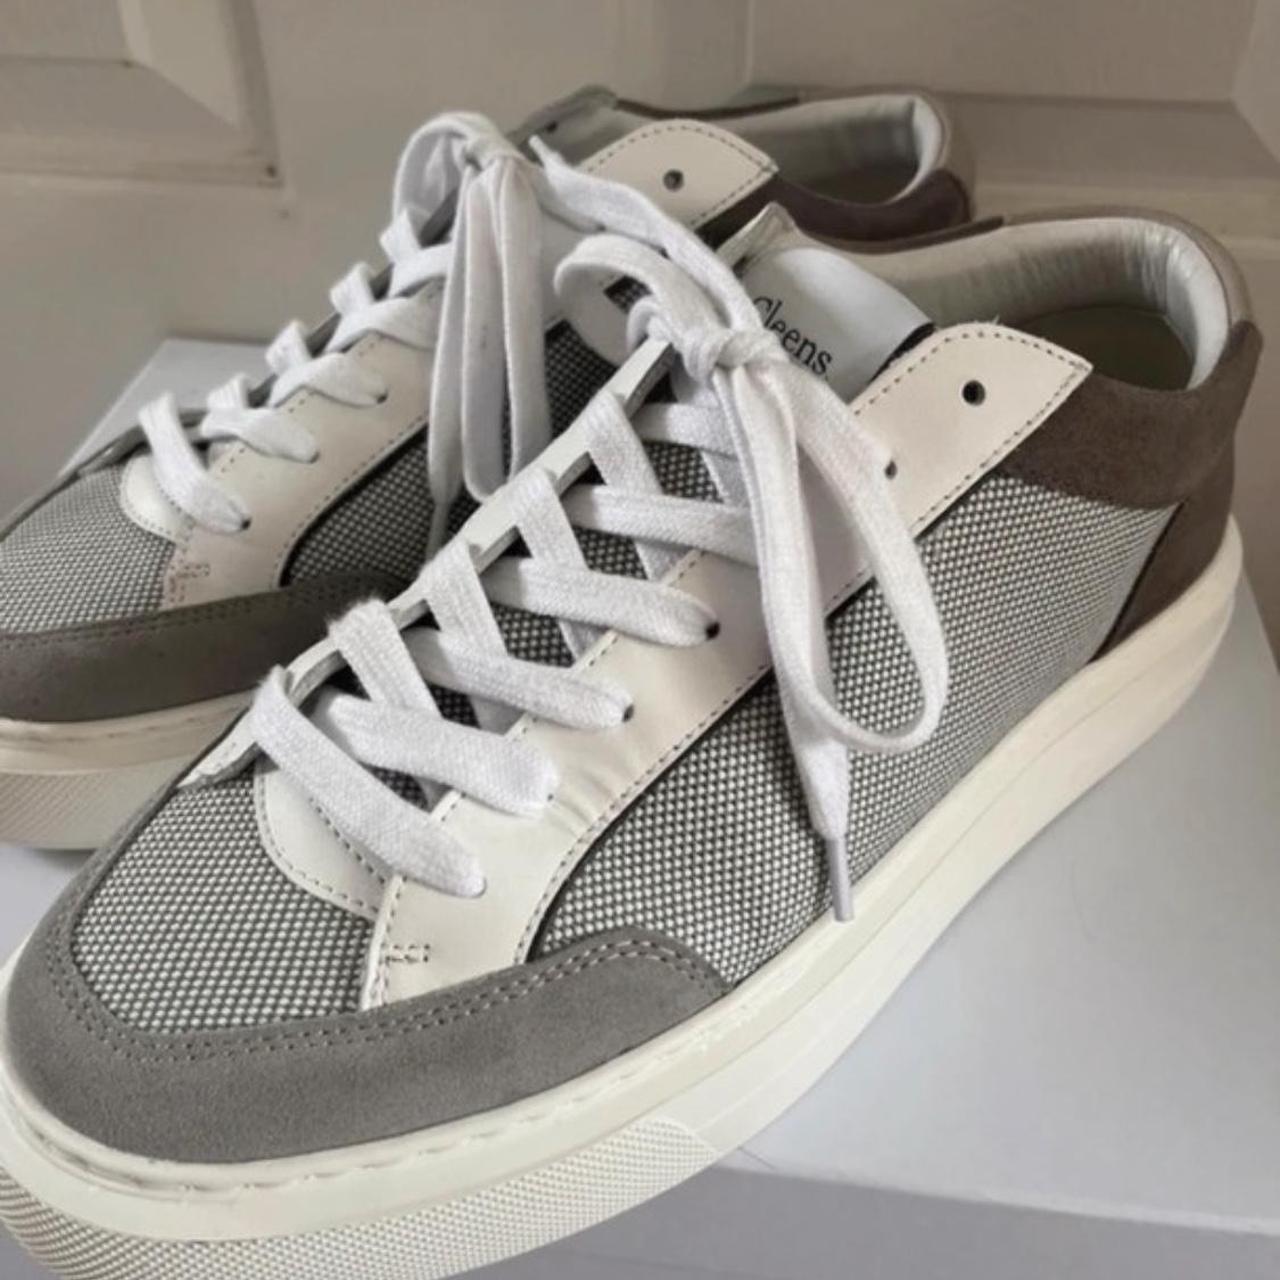 Cleens Luxor size UK 9 Only worn a handful of... - Depop